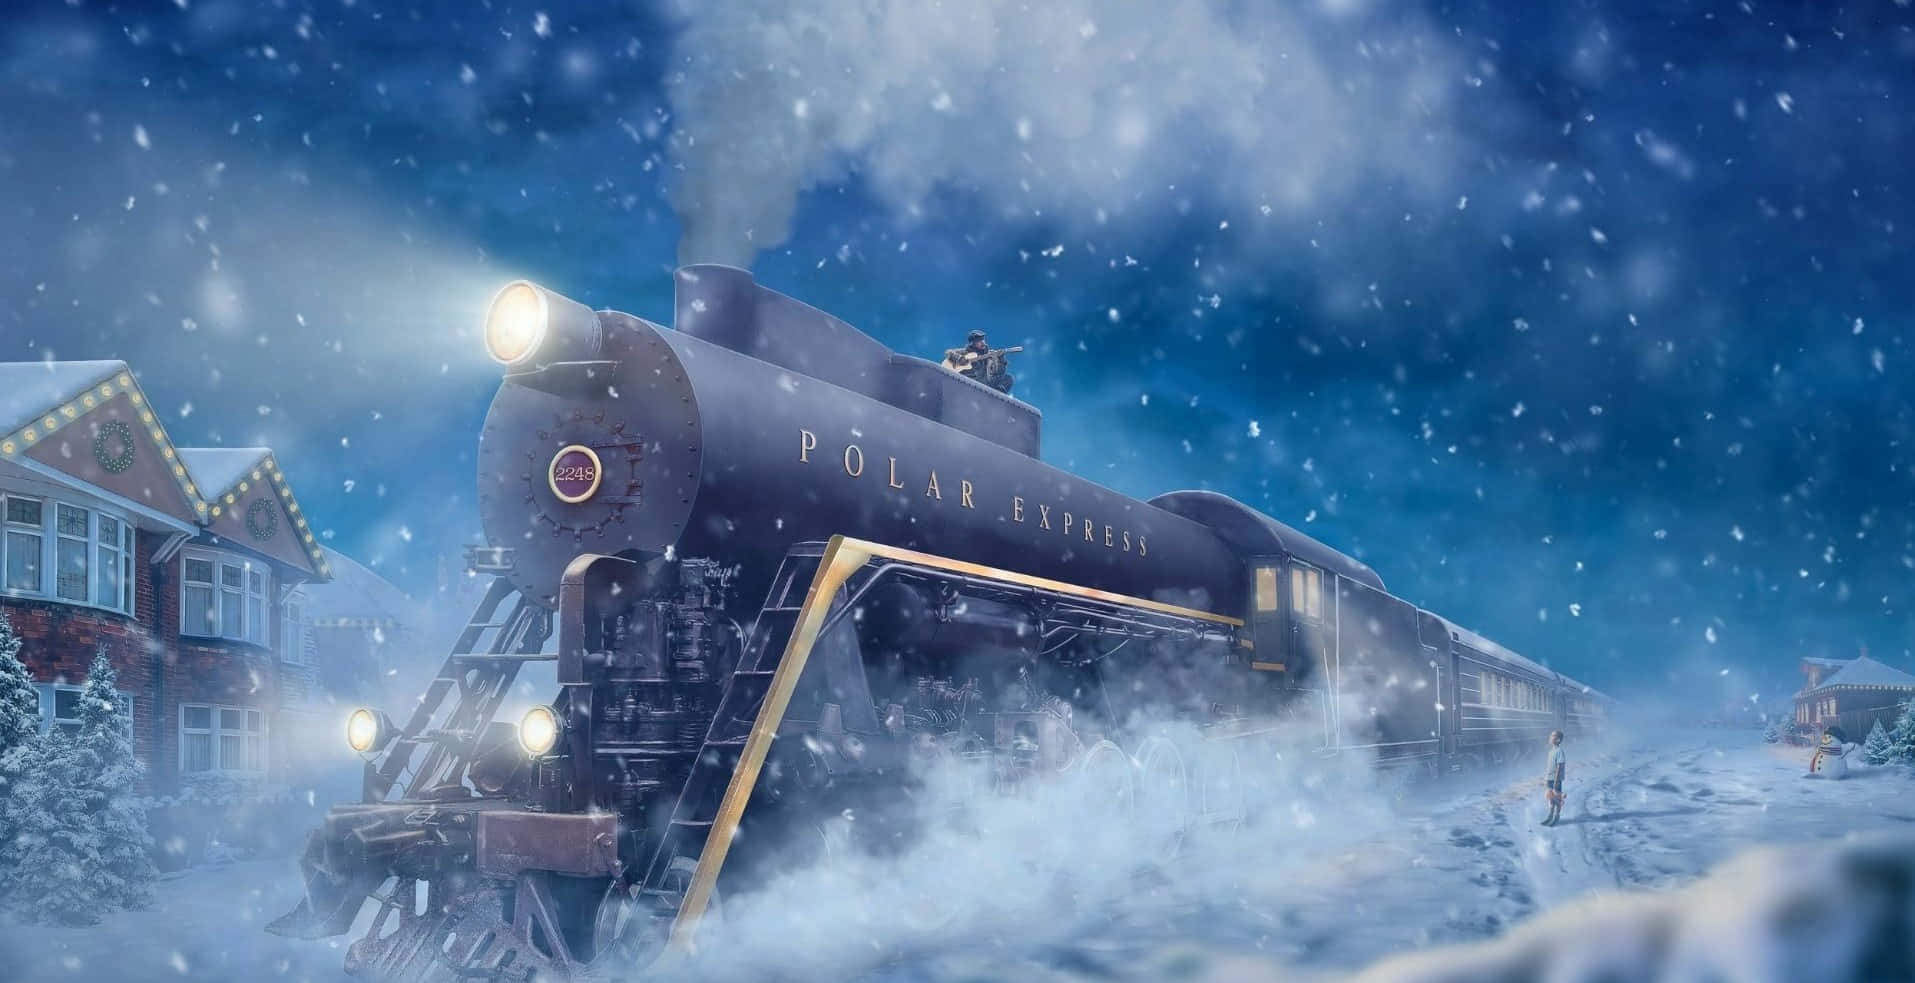 Christmas Vacation Zoom Background Polar Express